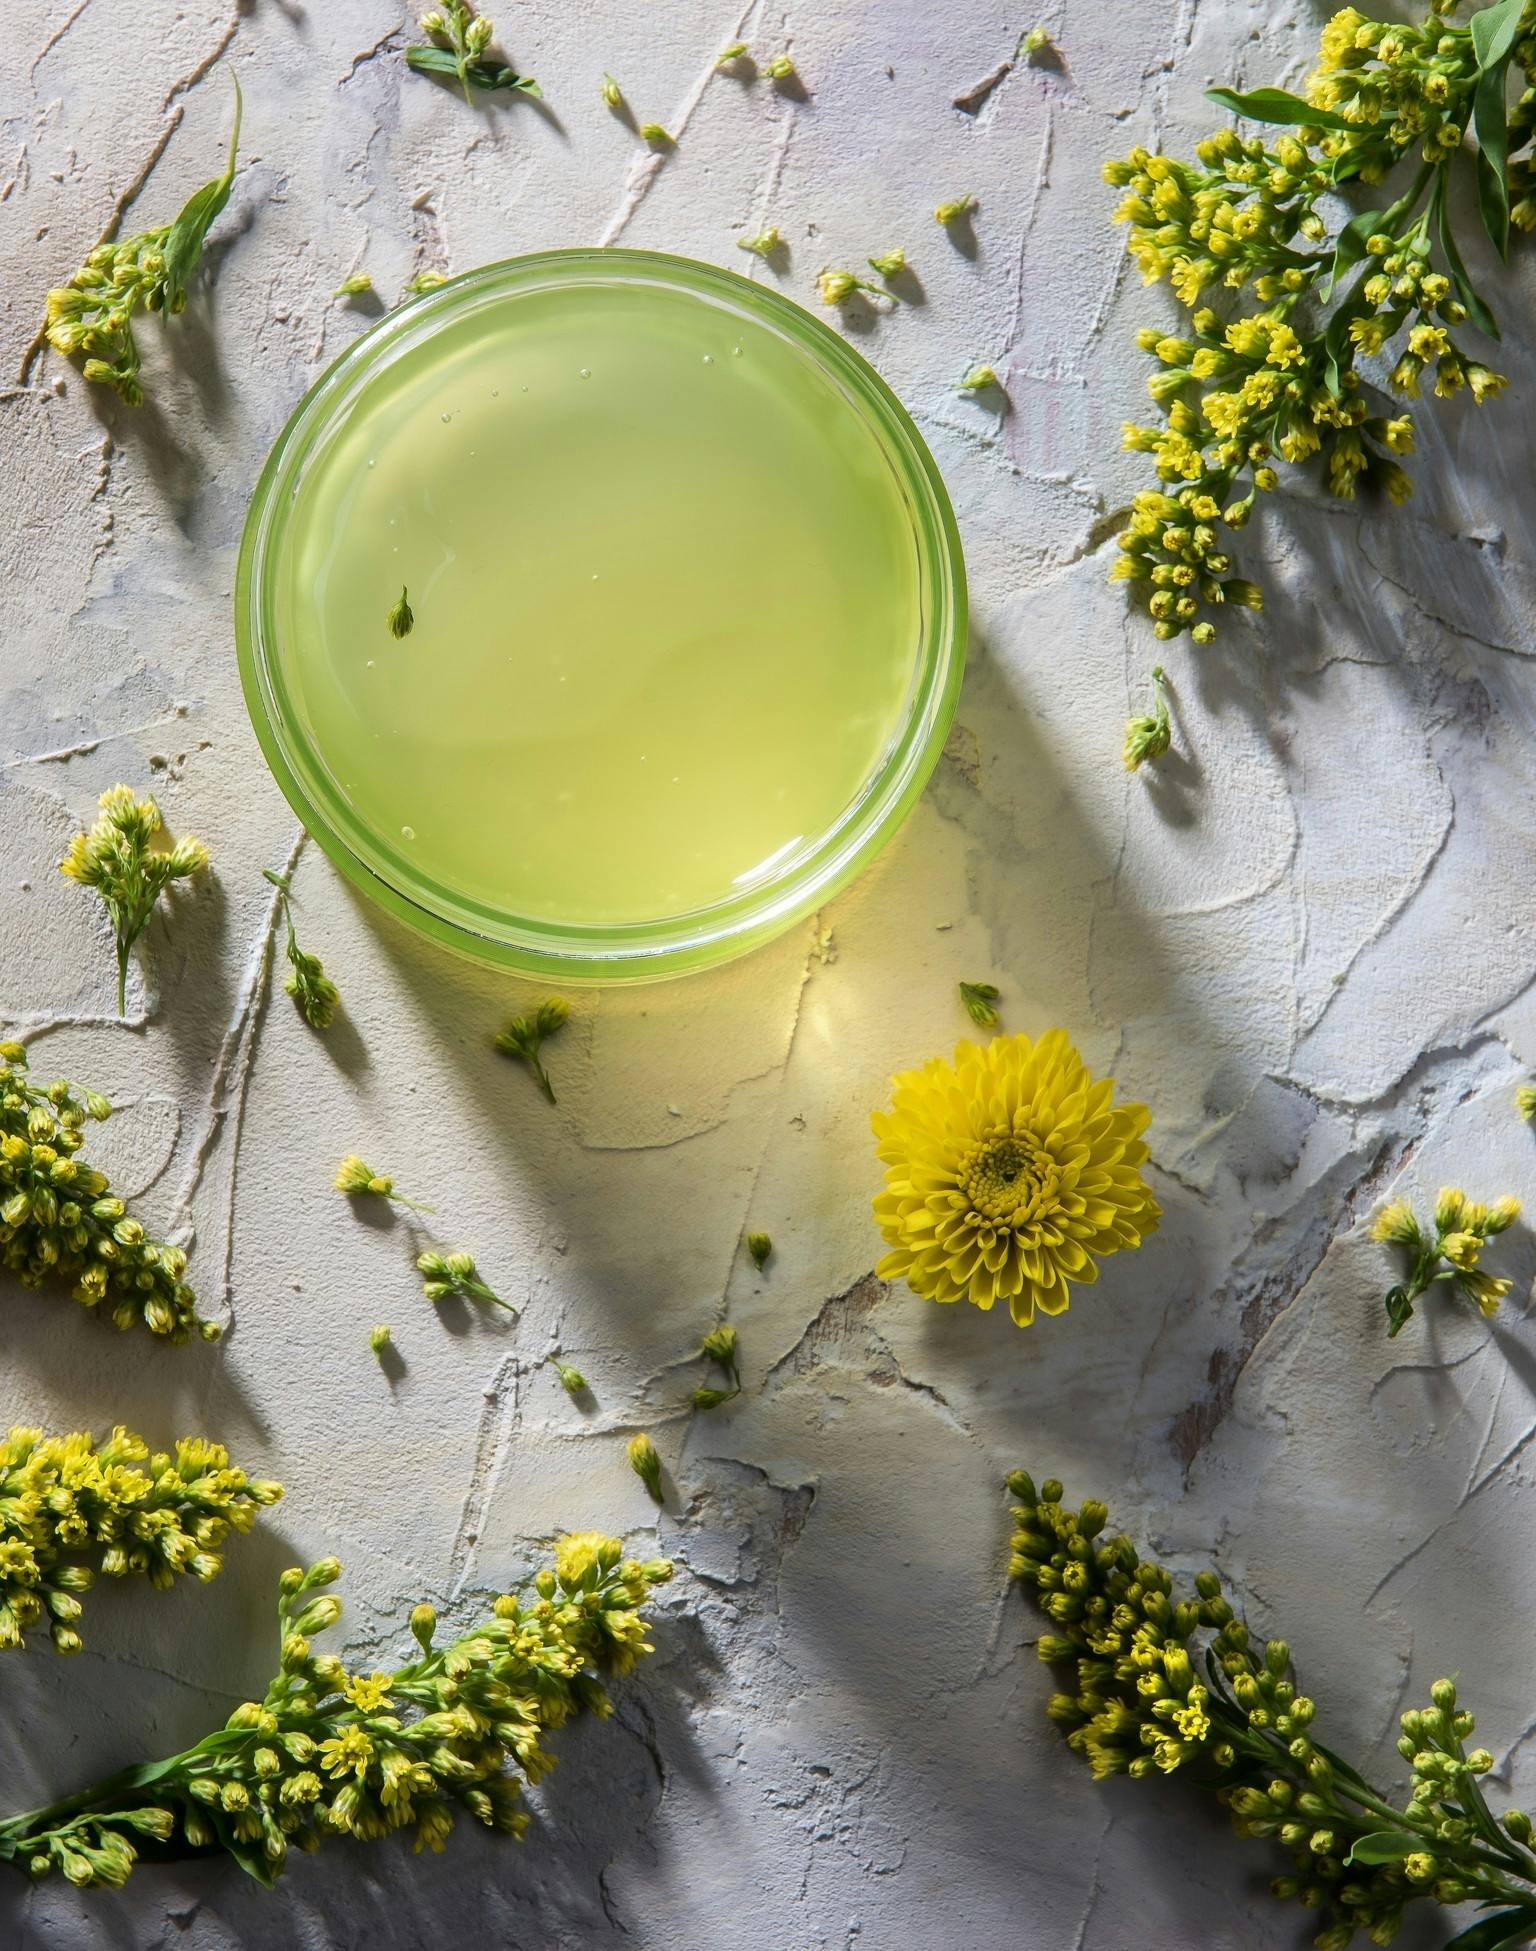 Pale green gel in a jar, surrounded by flowers